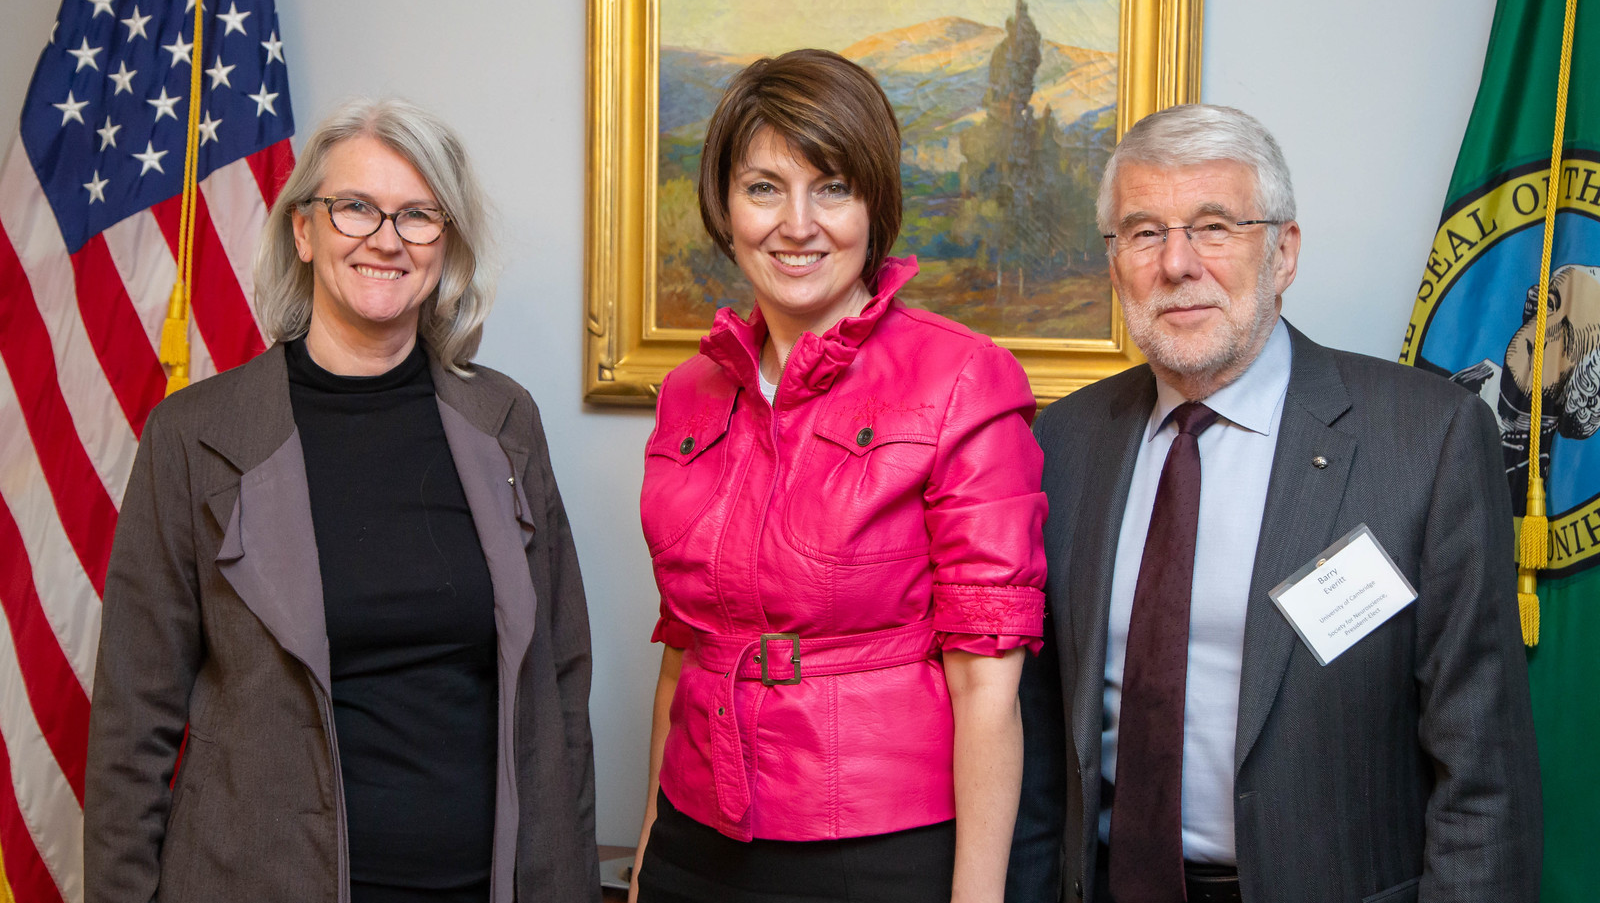 SfN President Diane Lipscombe (left), Rep. Cathy McMorris Rodgers (WA), and SfN President-Elect Barry Everitt meet during 2019 Capitol Hill Day.